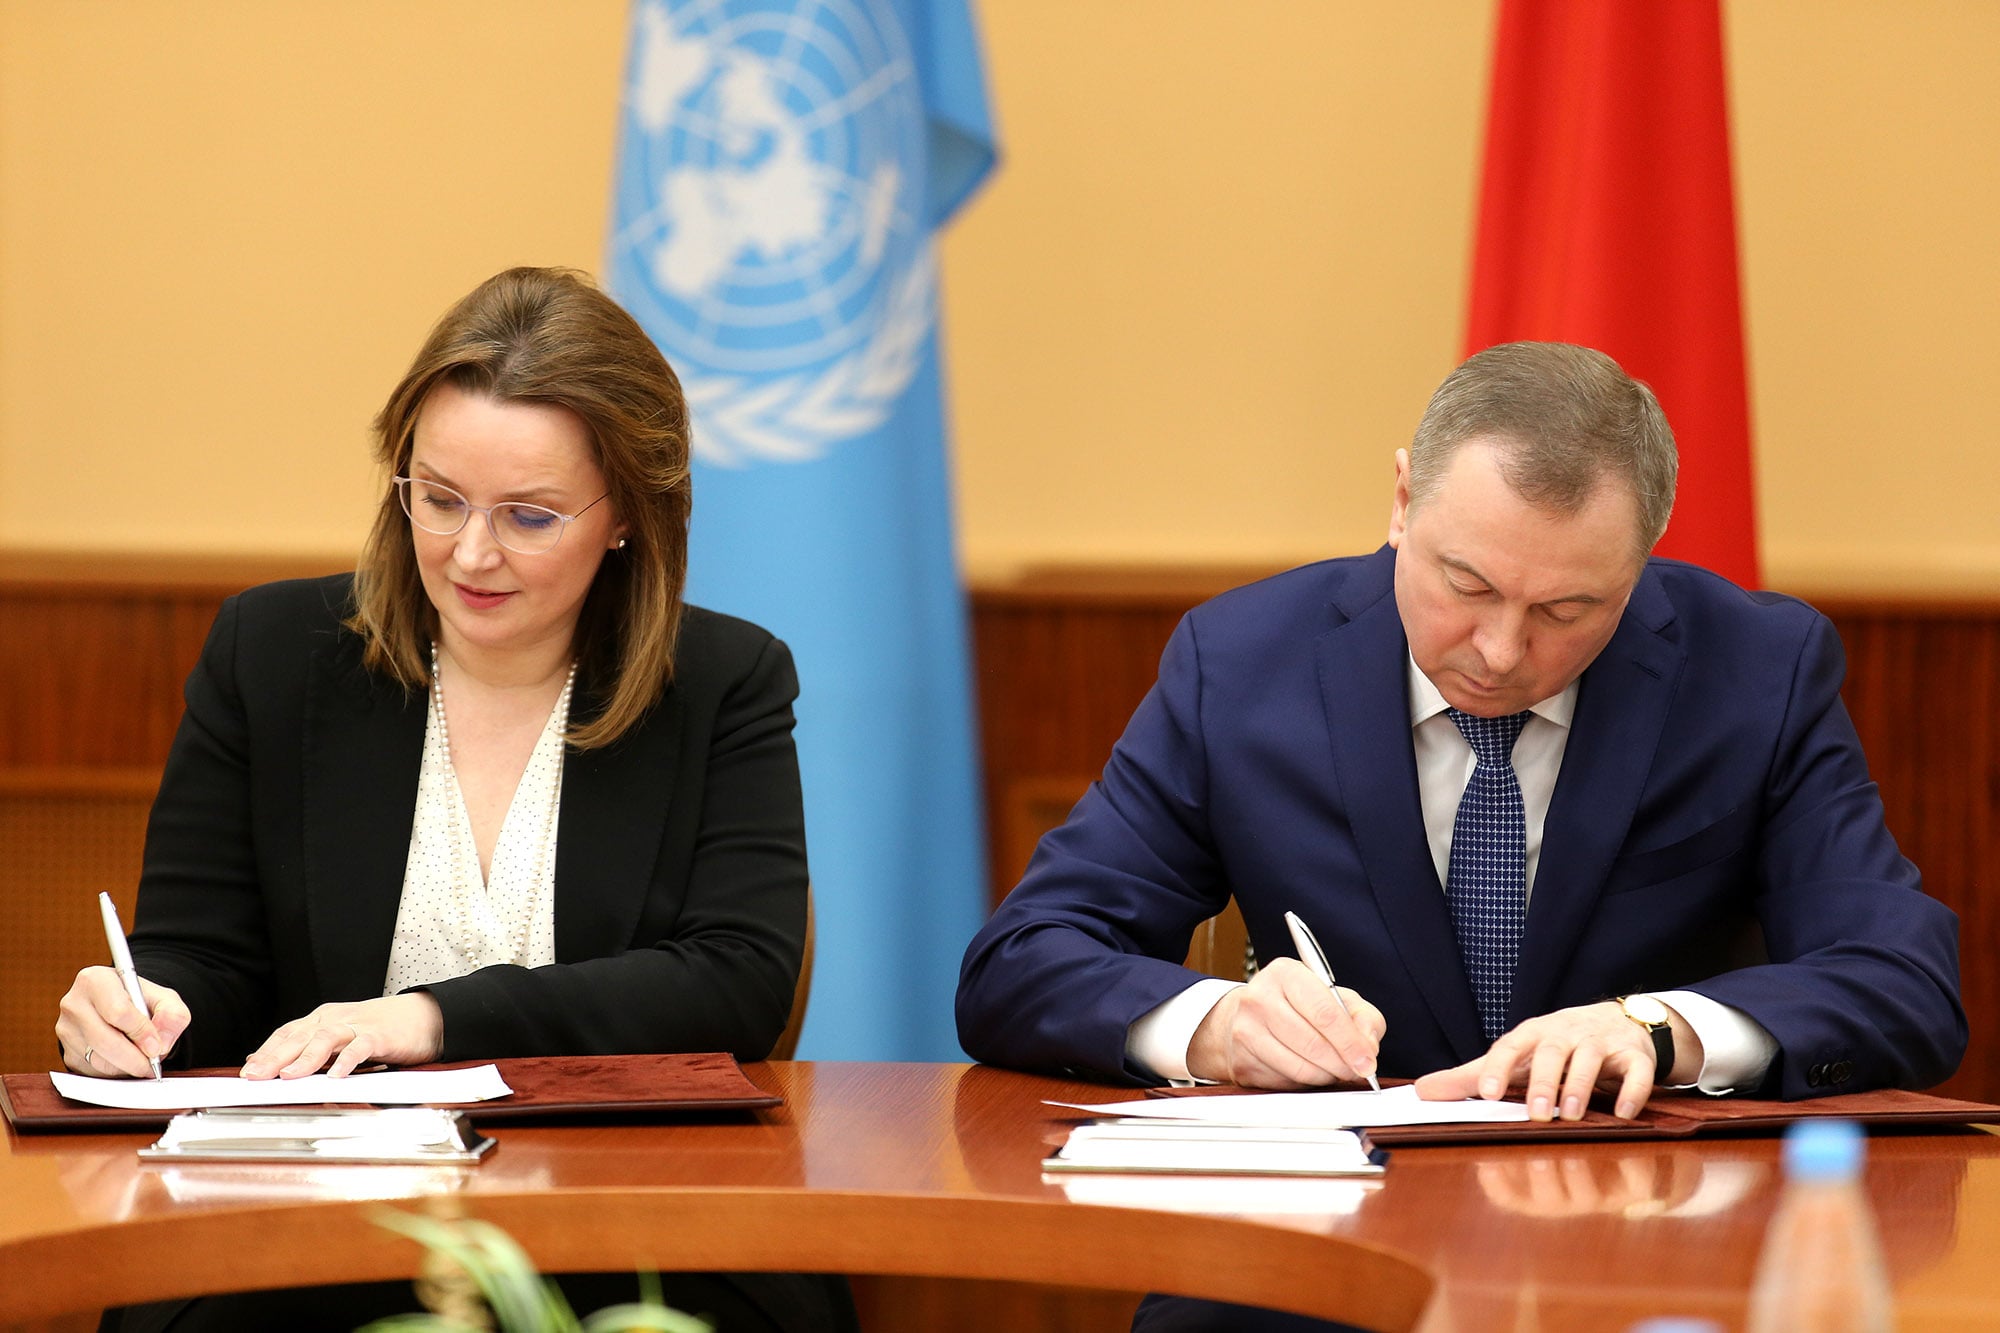 Ceremony of signing a plan of joint events for commemoration in Belarus of the UN 75th Anniversary